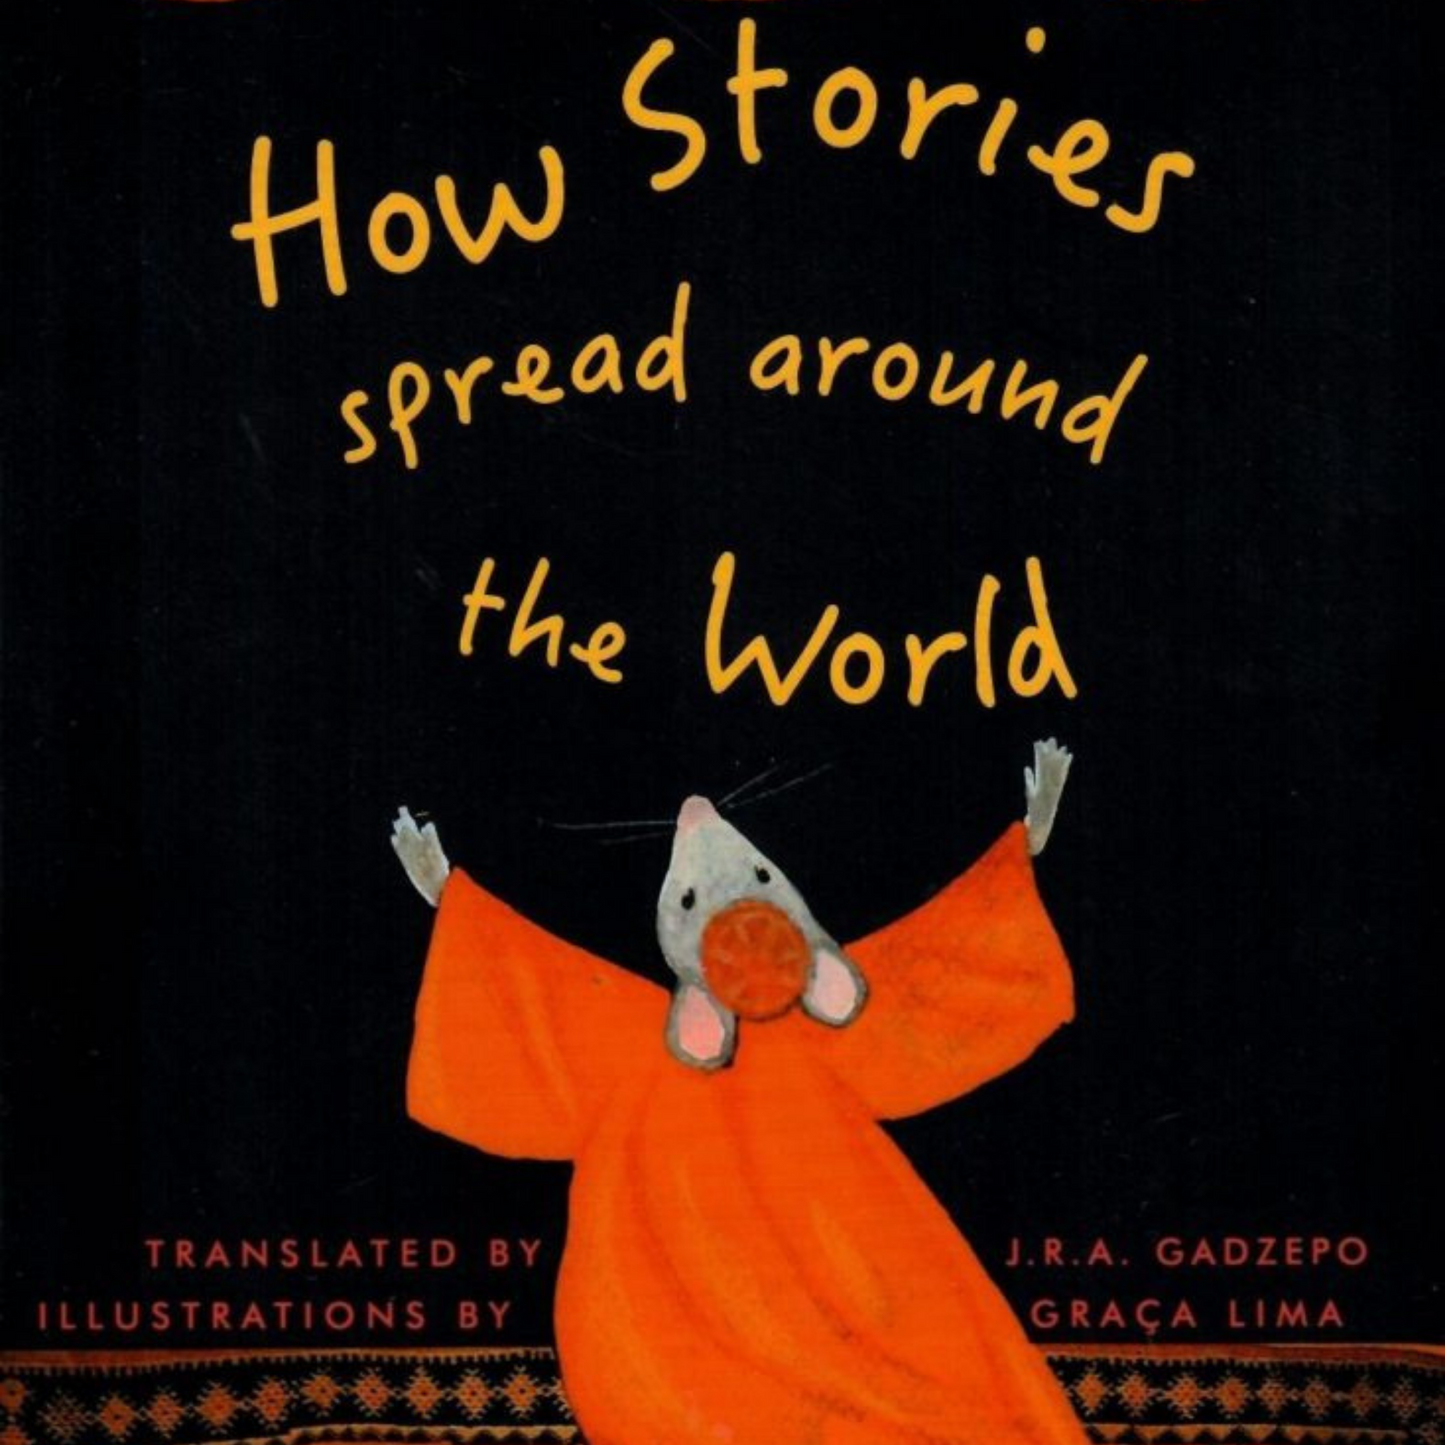 How stories spread around the world